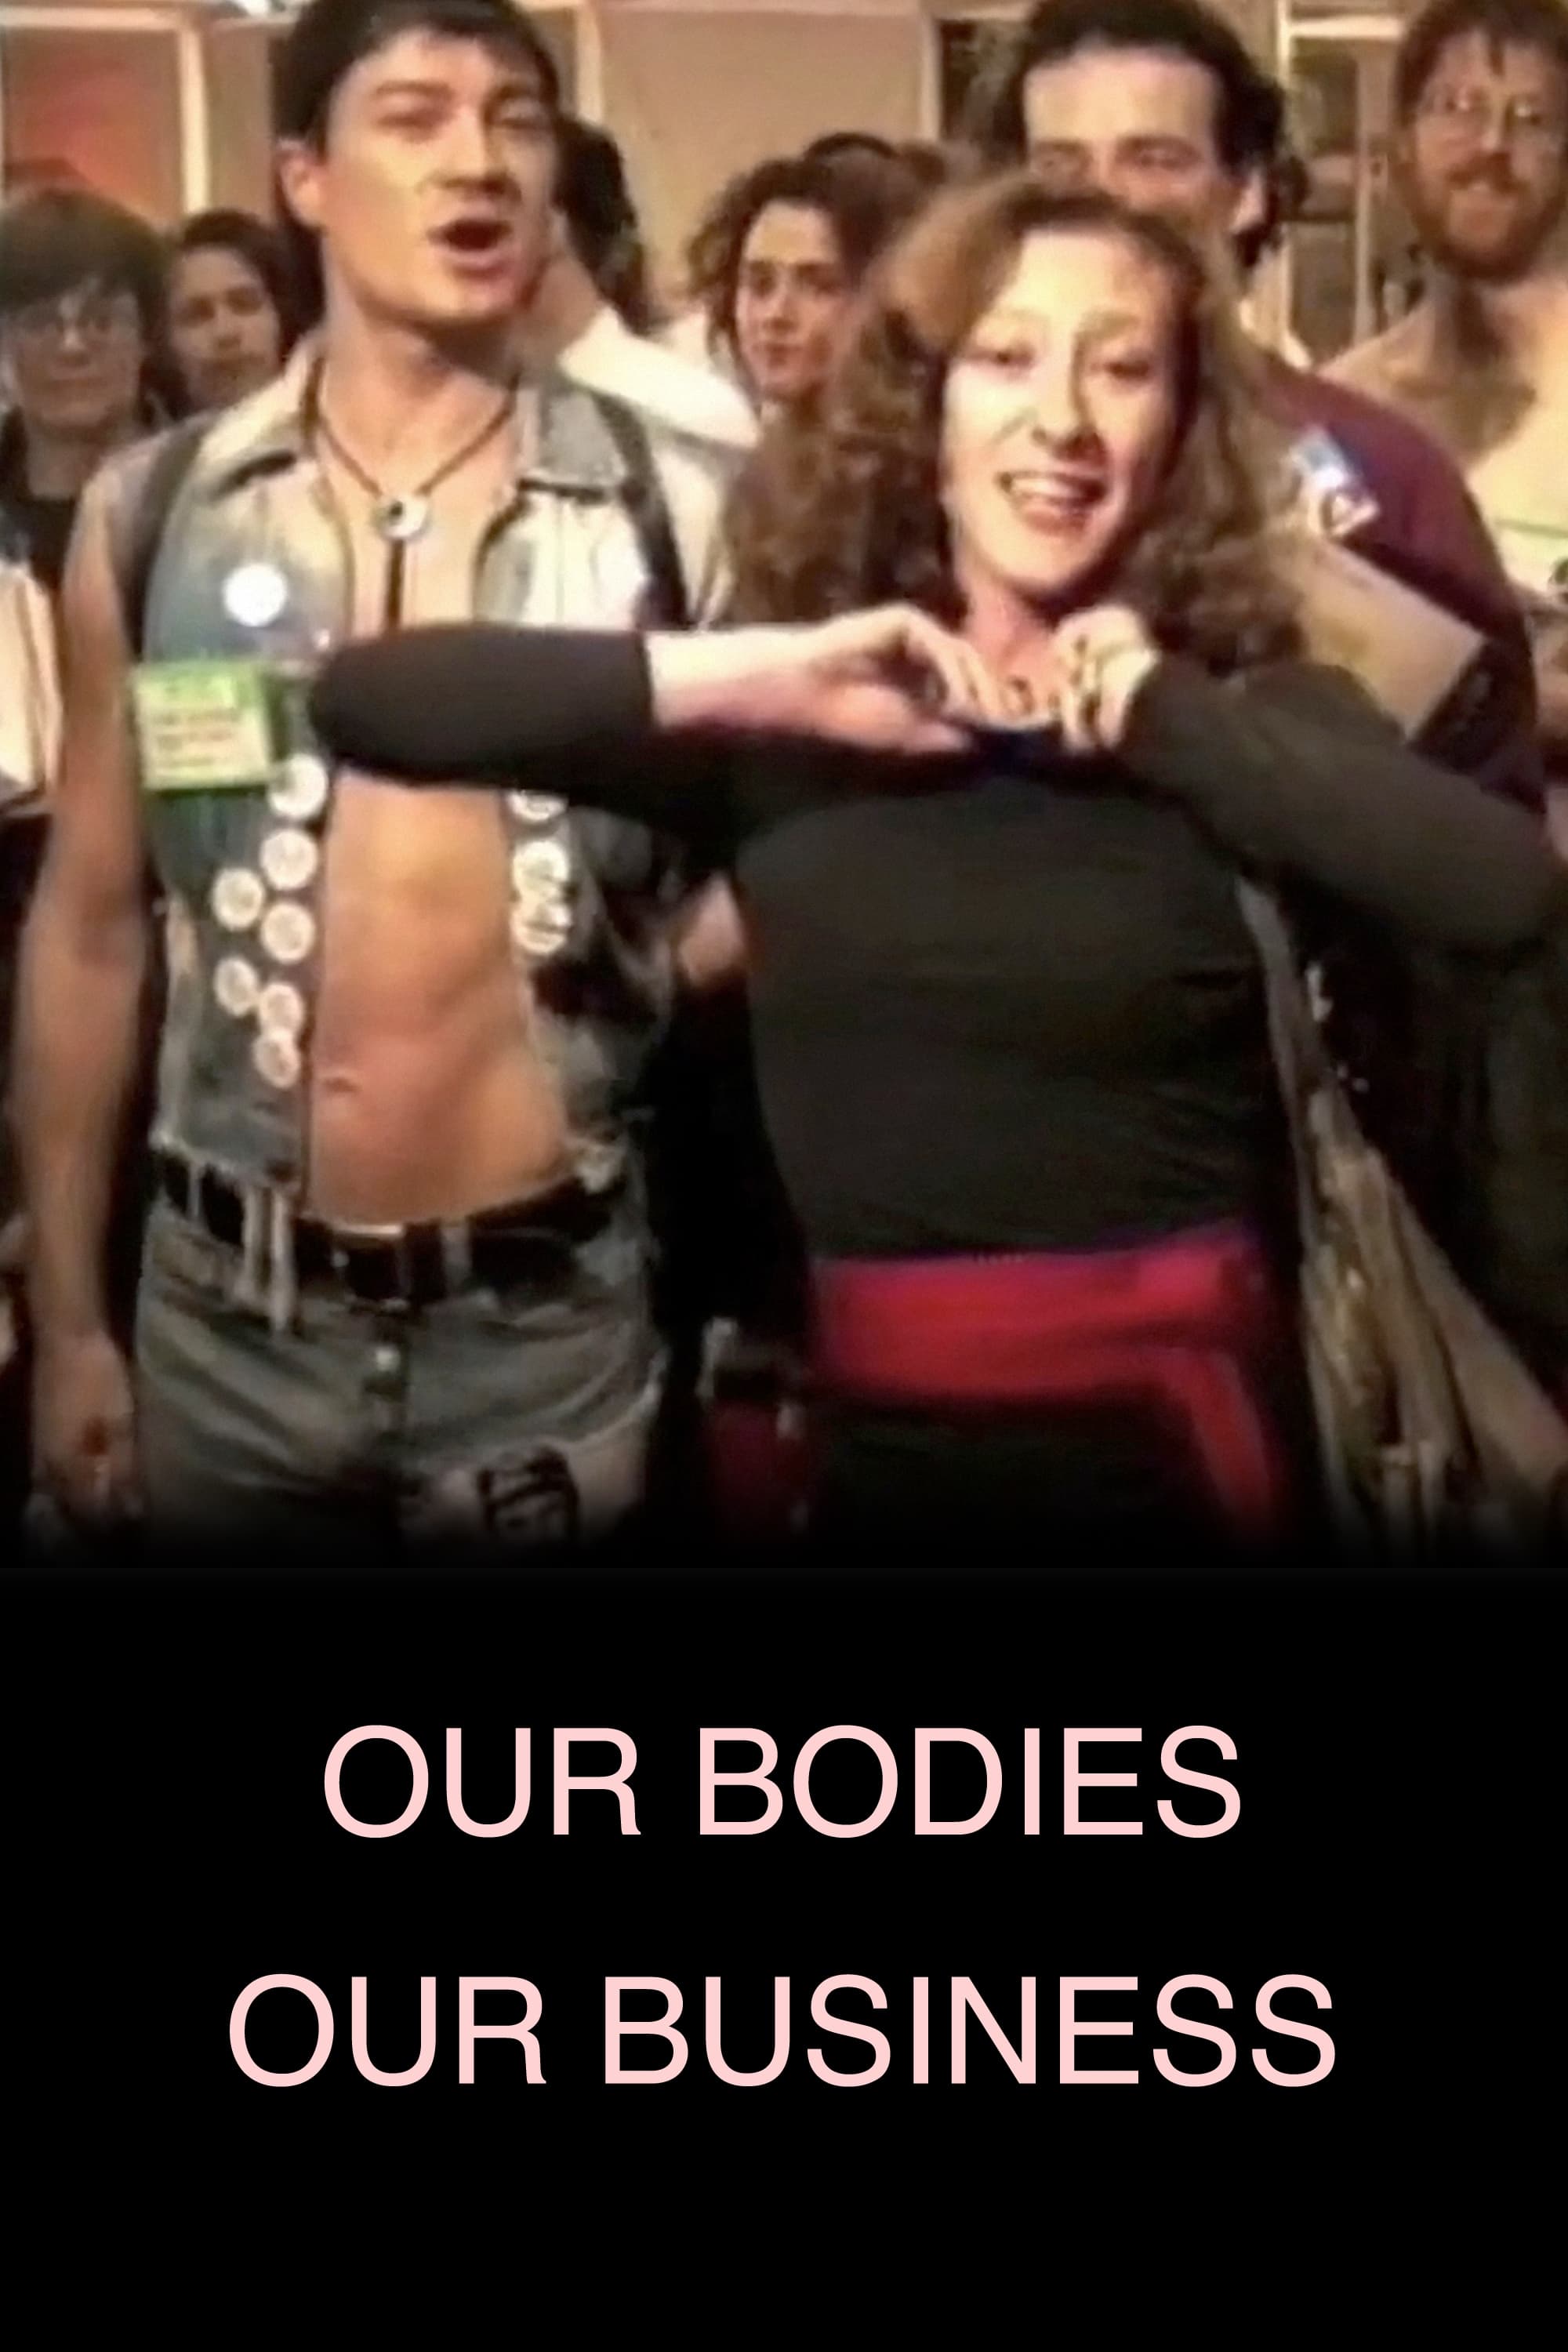 Our Bodies Our Business